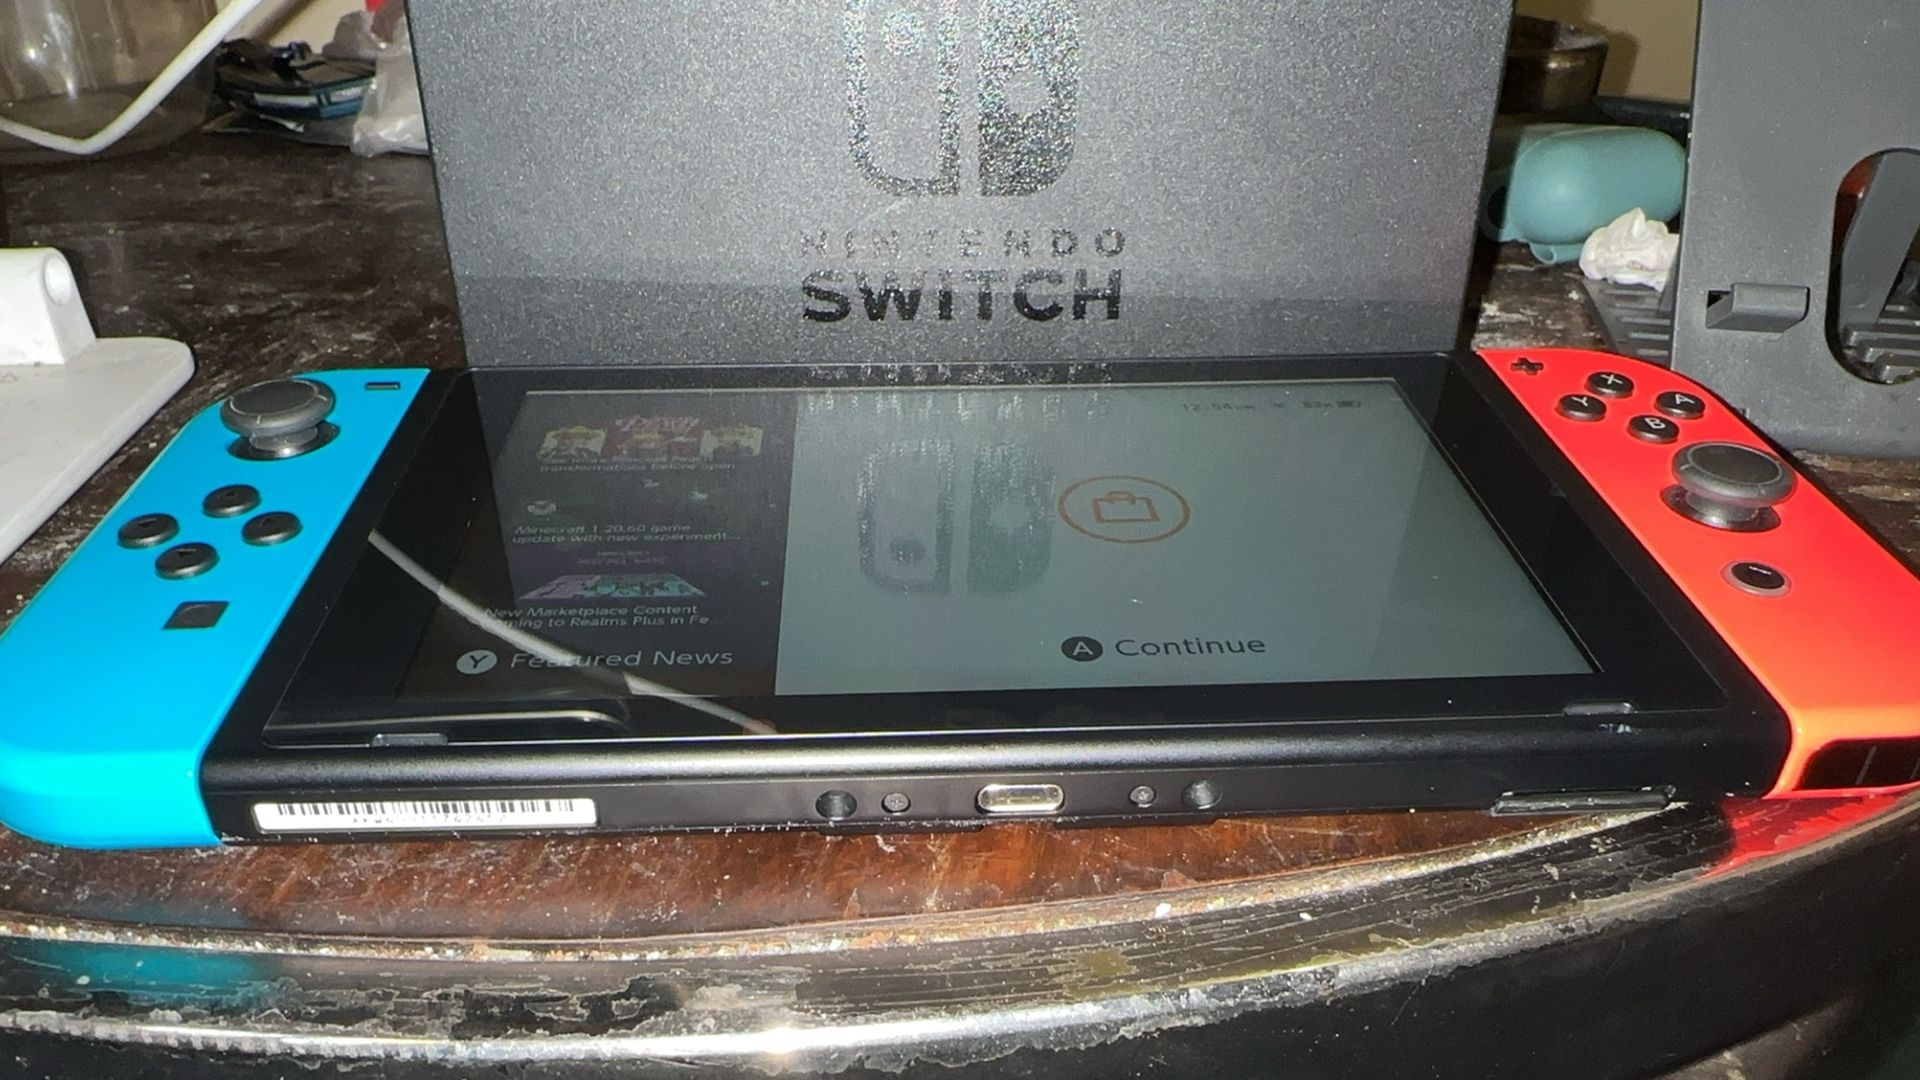 Nintendo Switch , With Dock , With Over 10 +60 Dollar Games Downloaded 